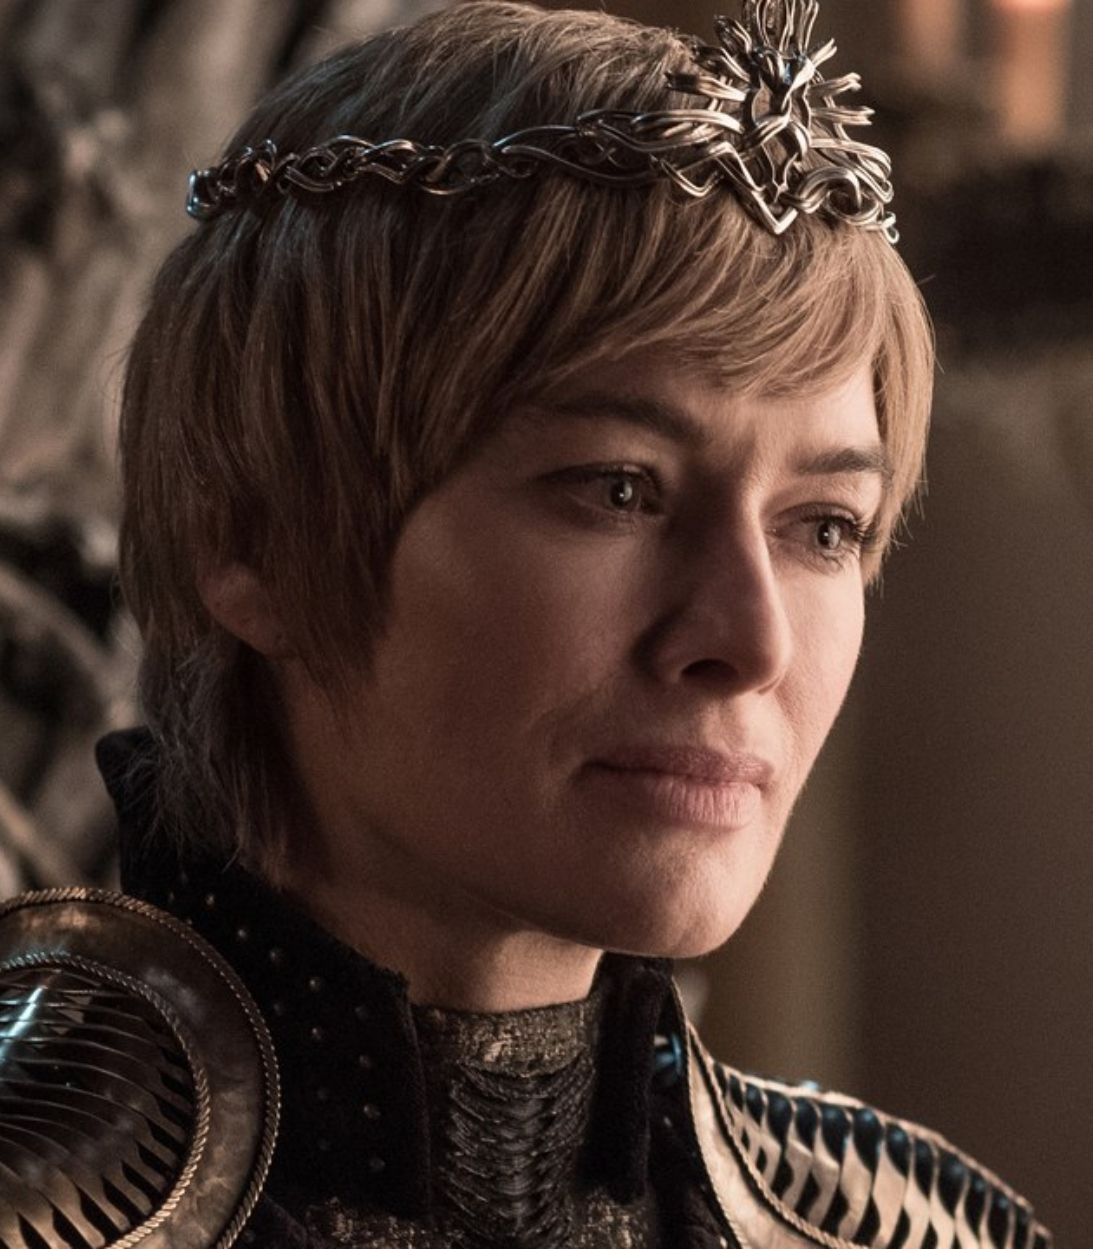 Game-of-Thrones-Cersei-Lannister-1093